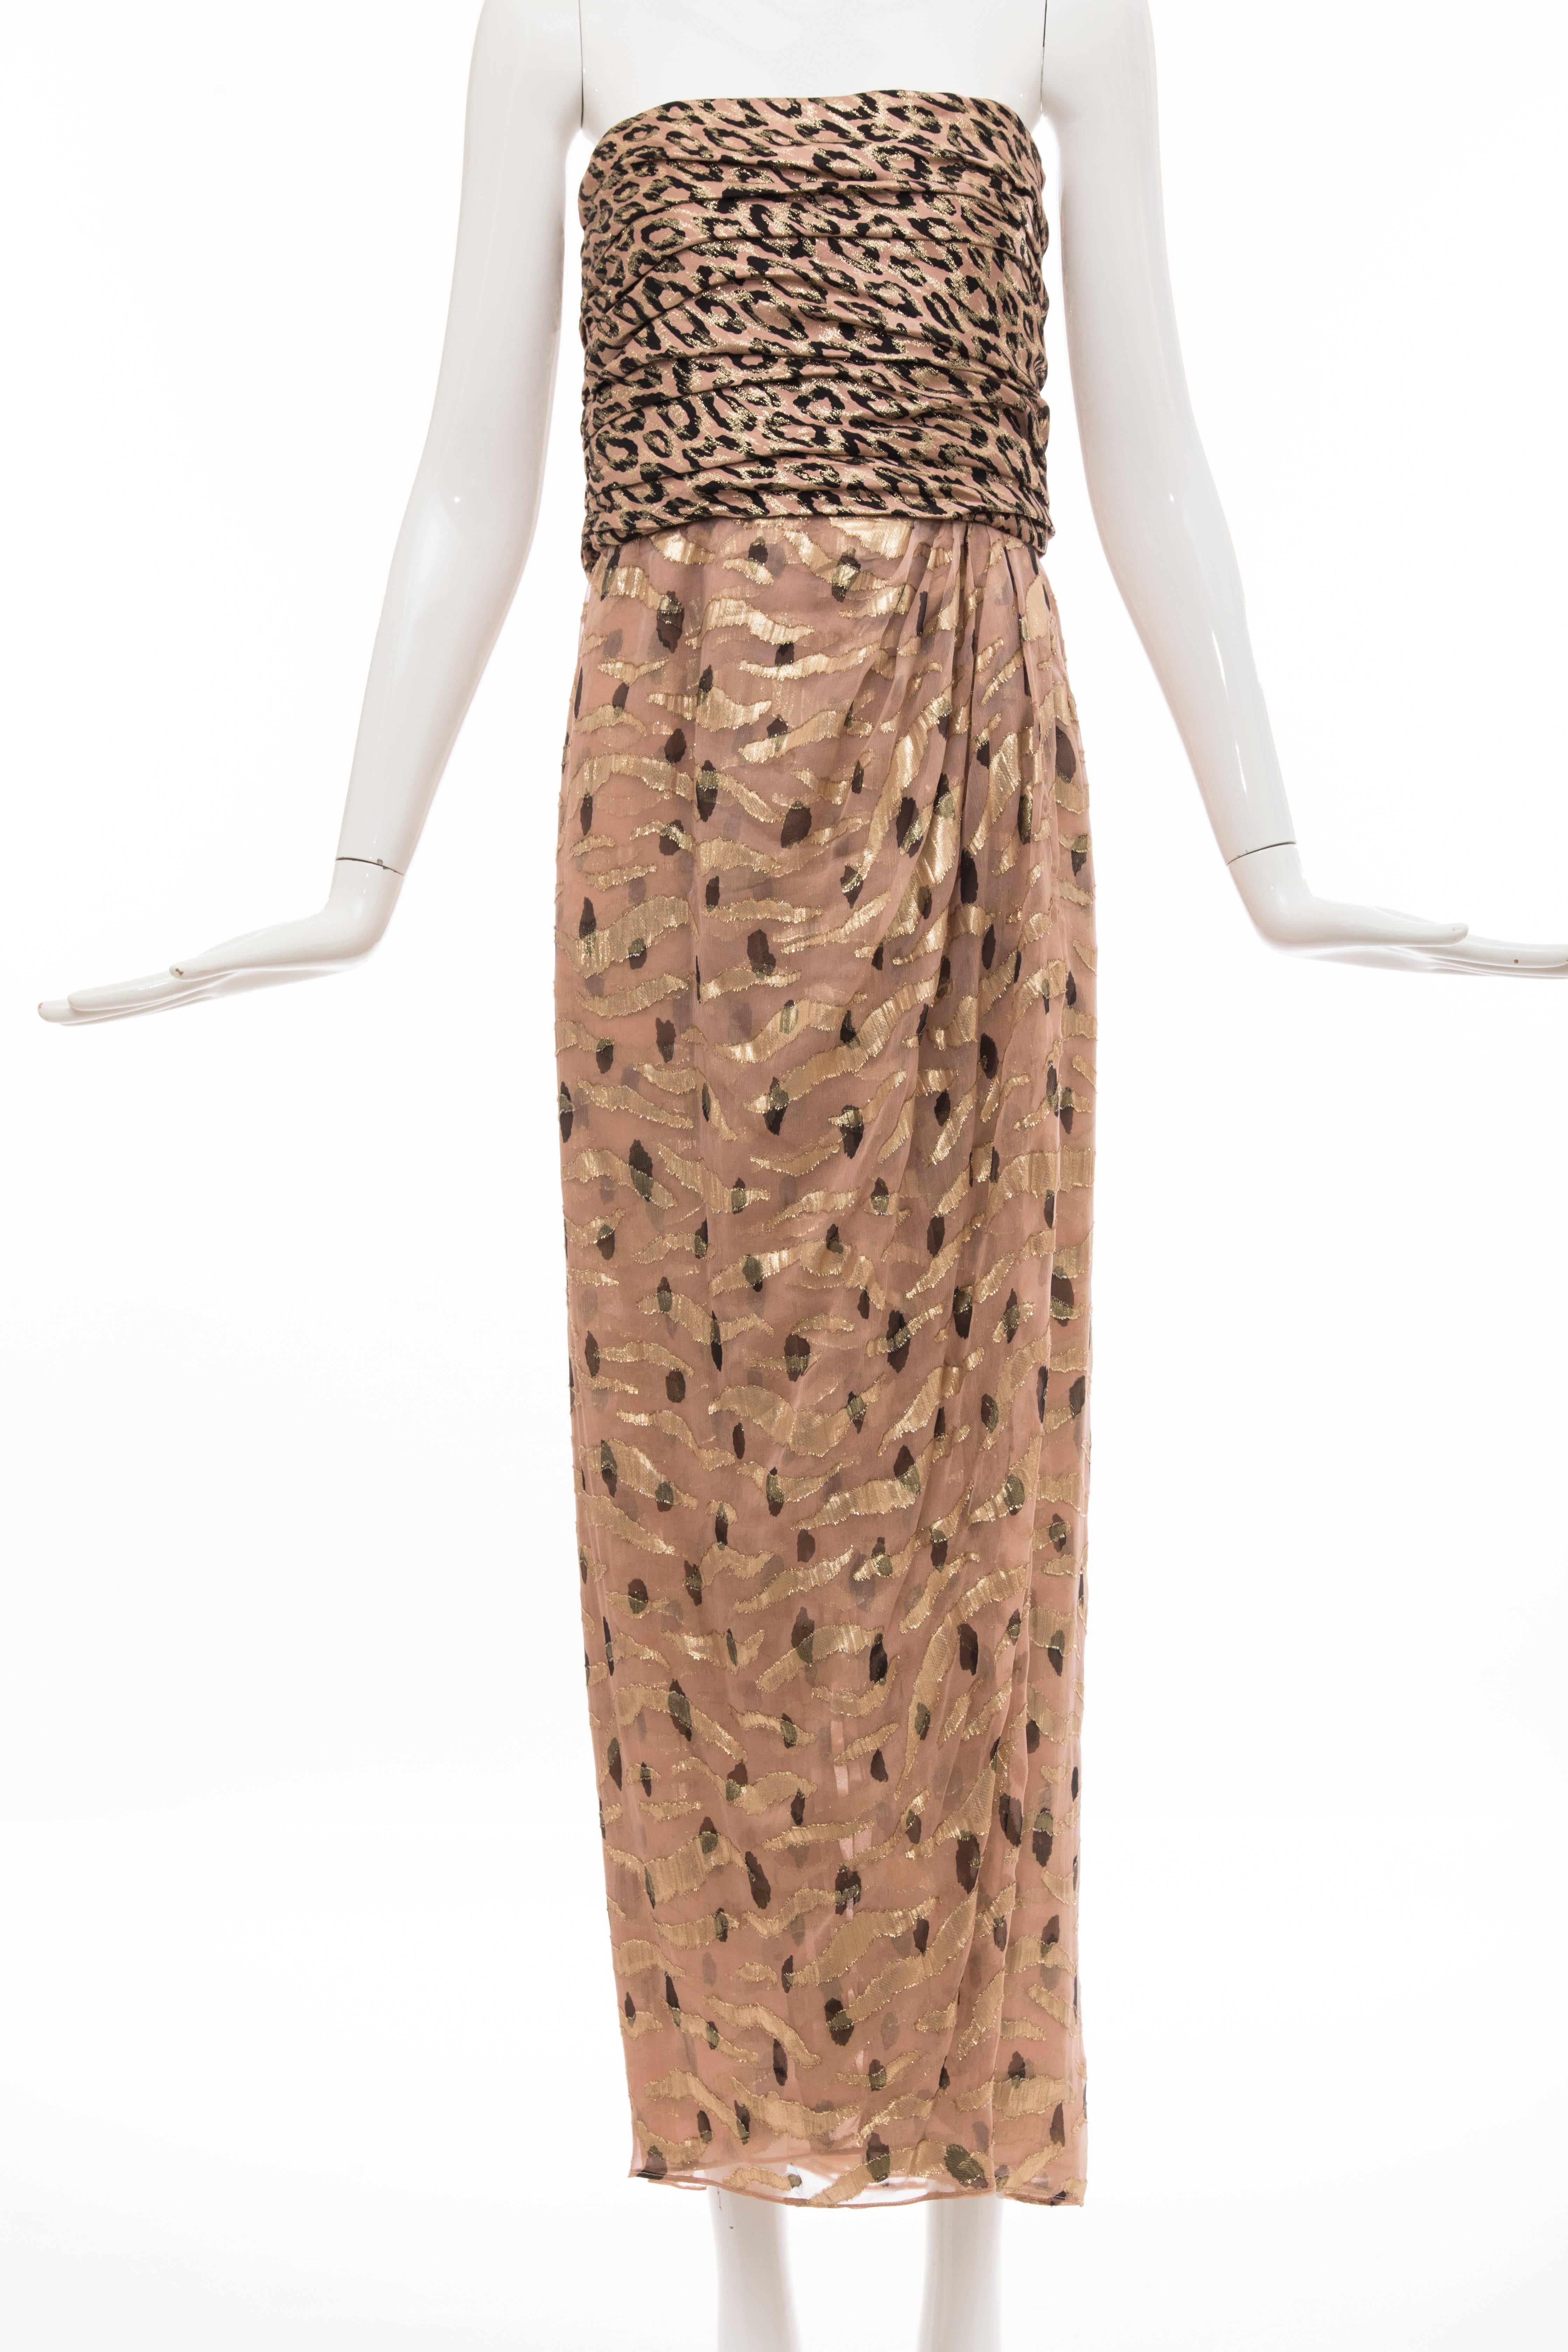 Bill Blass, Autumn-Winter 1989 strapless, lame and chiffon evening dress, shirred leopard print lame bodice, printed chiffon and lame print tulip shaped skirt, back zip and fully lined in silk chiffon.

Sized marked a US 12 but fits like a modern 10